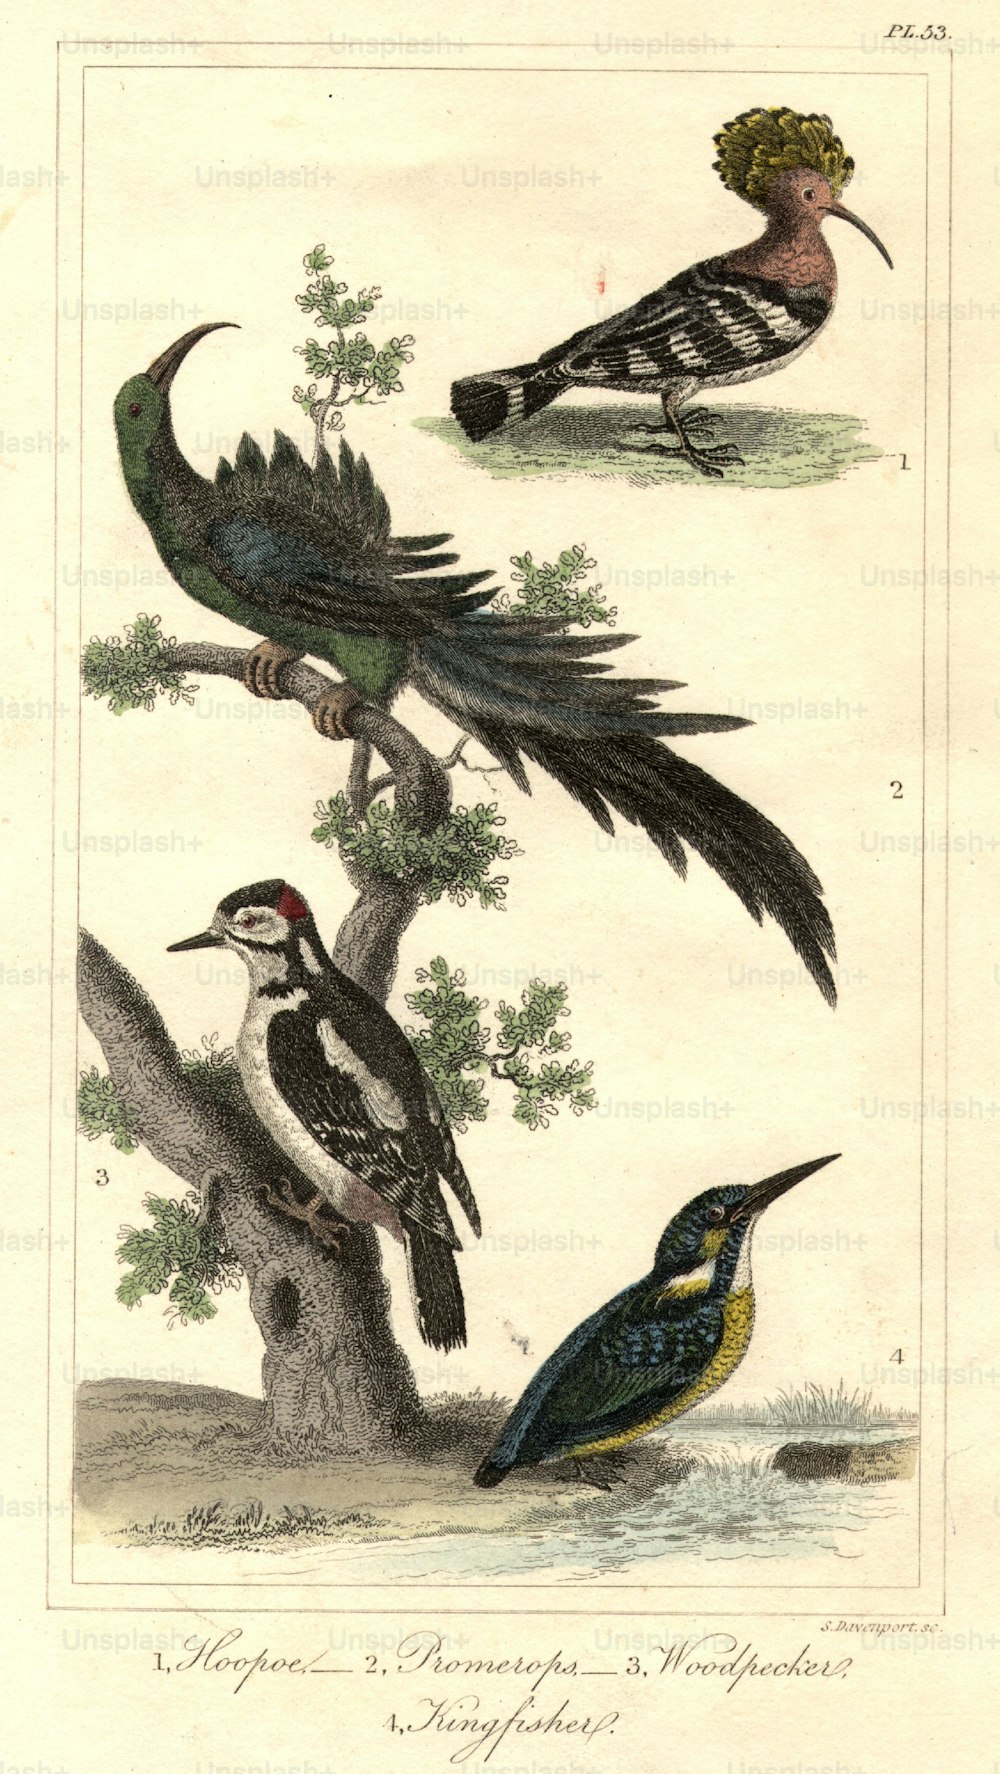 circa 1800:  The Crested Hoopoe, top, the Promerops, centre-top,  the Woodpecker, centre-bottom, and the Kingfisher, bottom.  (Photo by Hulton Archive/Getty Images)